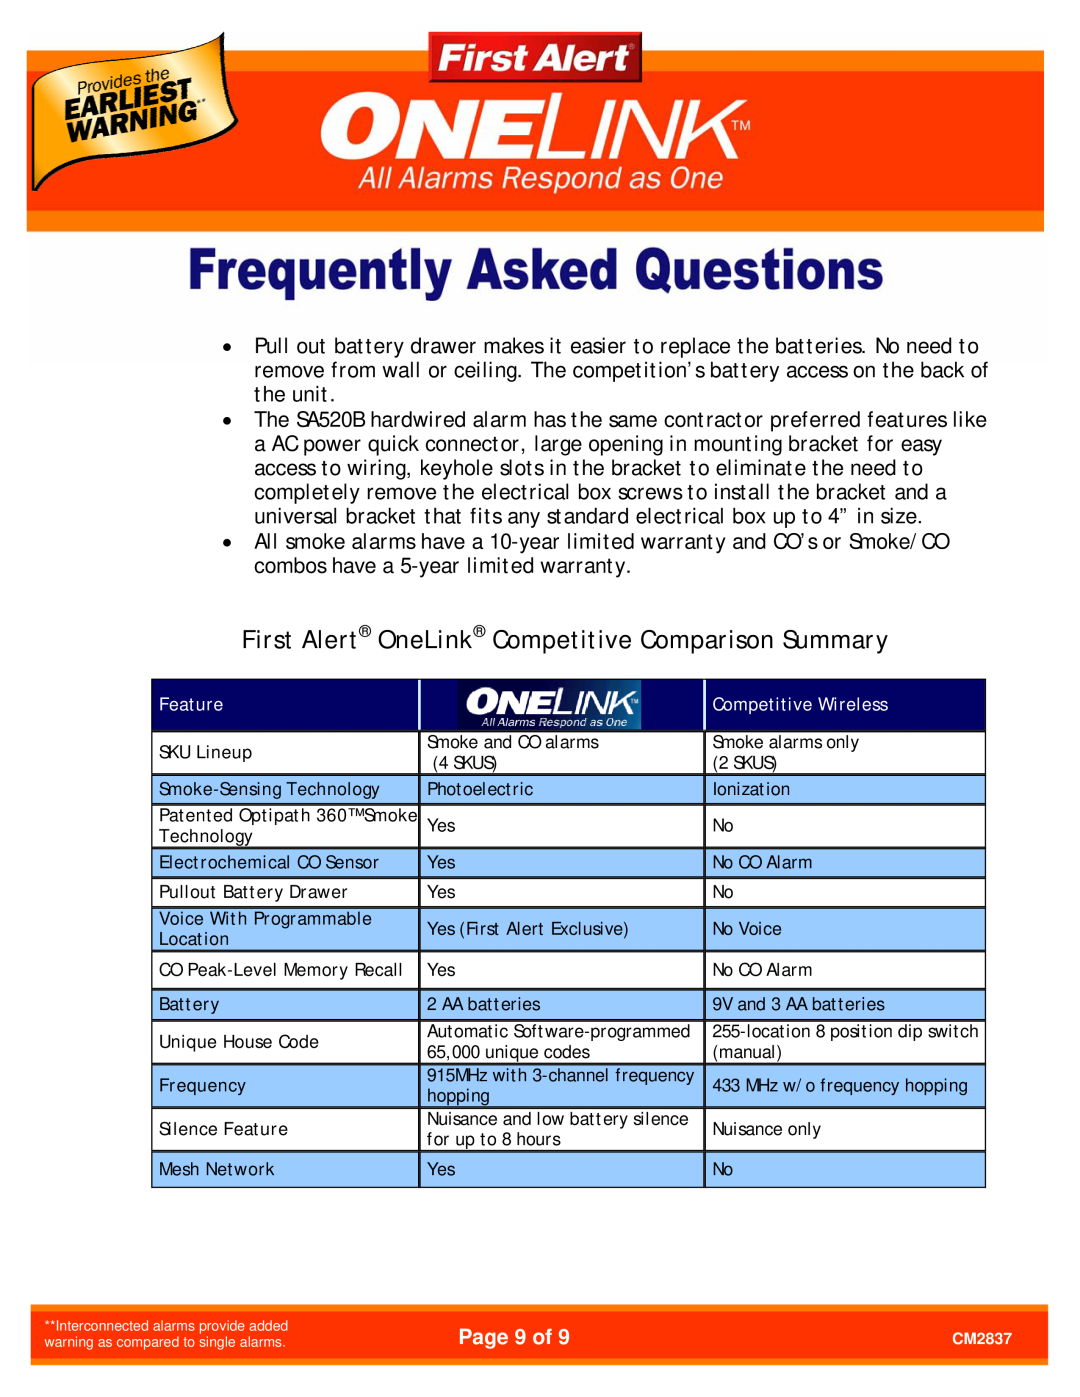 First Alert CM2837 manual Page 9 of, Feature, Competitive Wireless 